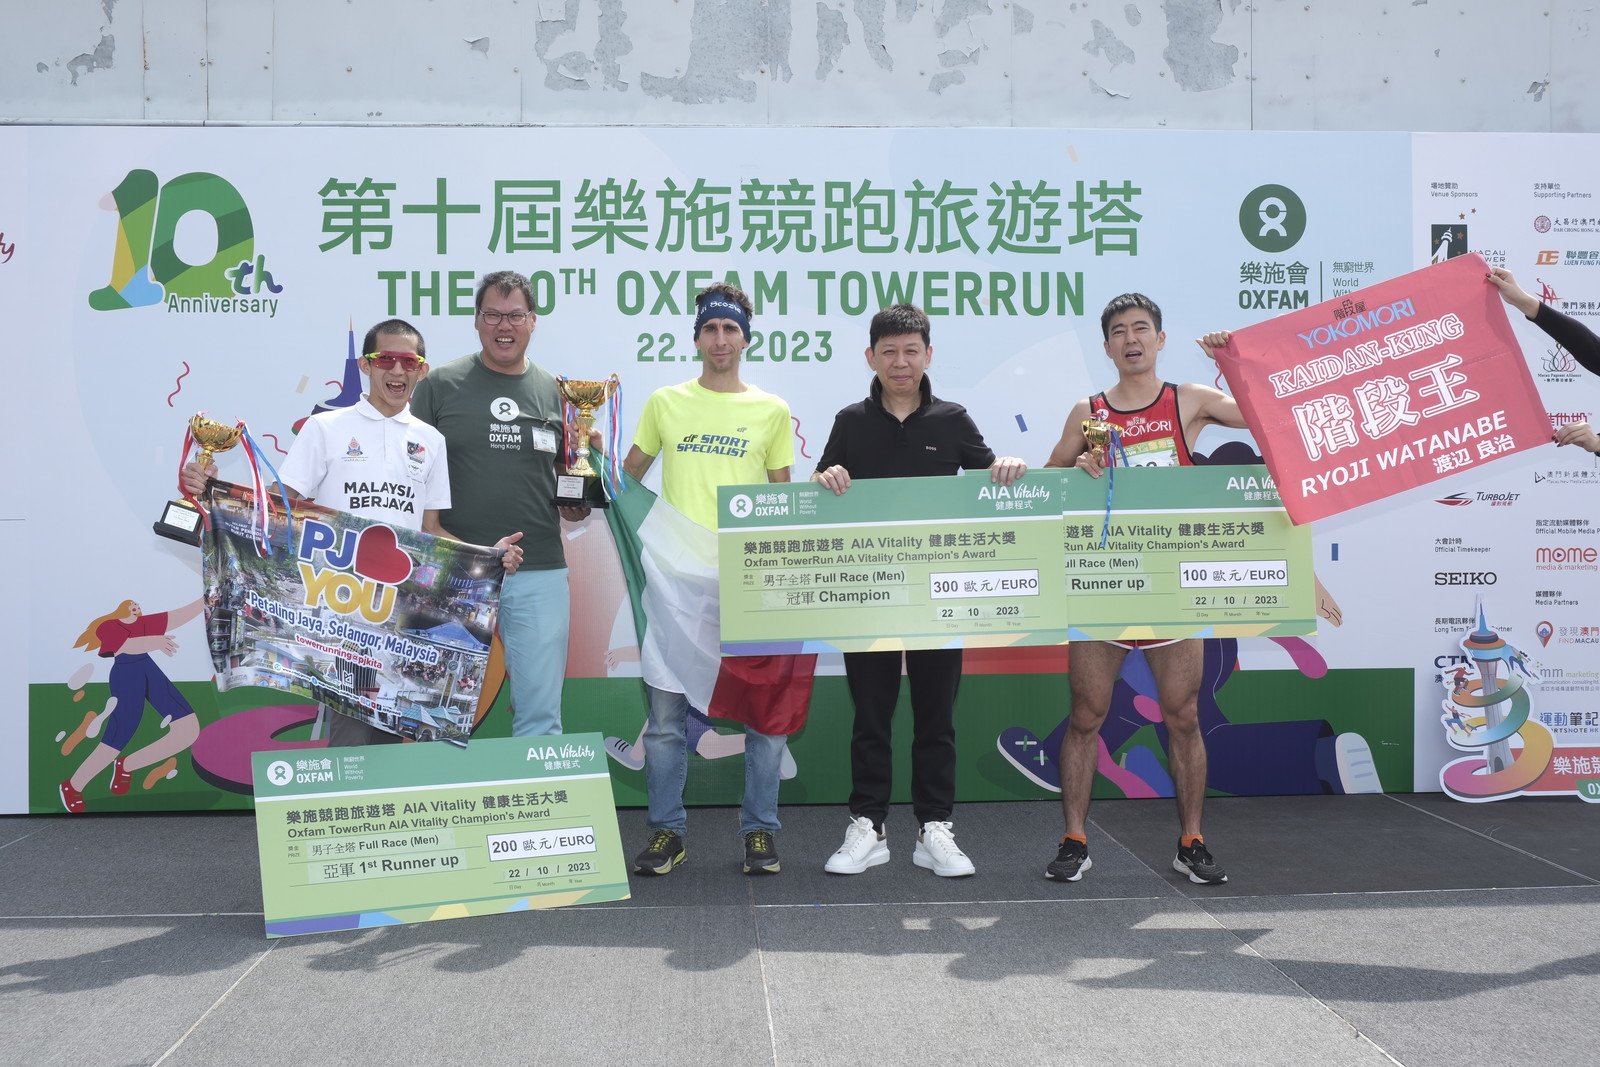 In the ‘Individual Challenge’ men’s race, the champions for the full tower run have broken record!  The champion was won by Fabio Ruga (Italy), completing the race in 6 minutes and 40 seconds. The second and third places were secured by WAI CHING SOH (Malaysia) with 6 minutes and 42 seconds and RYOJI WATANABE (Japan) with 6 minutes and 46 seconds, respectively. 